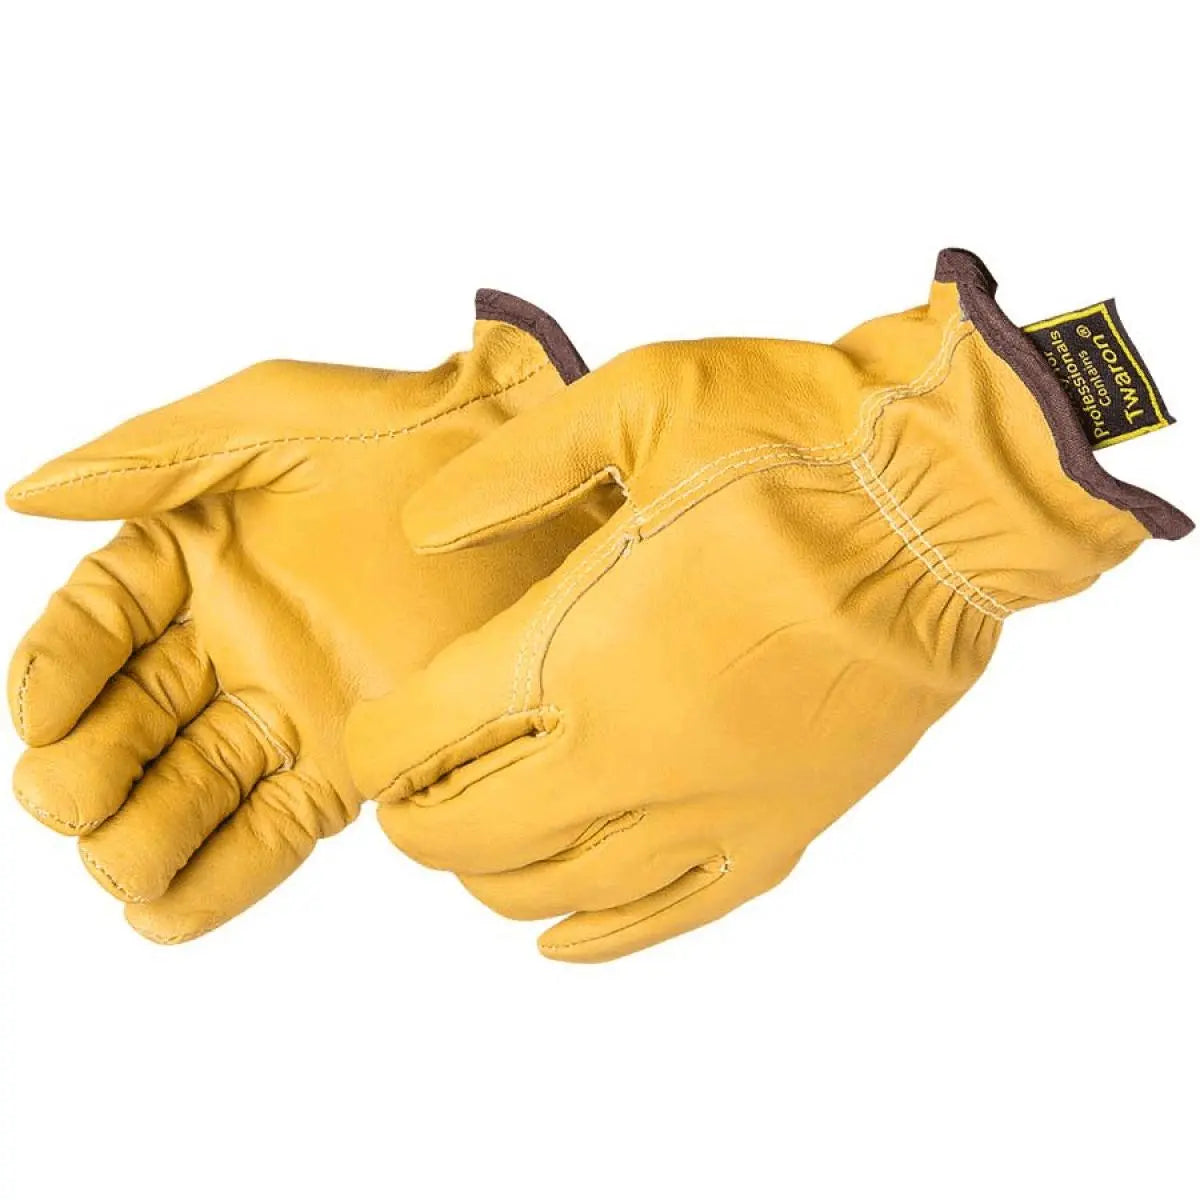 LIBERTY - Premium Golden Goatskin Cut A6 Leather Driver - Wing Thumb - Becker Safety and Supply